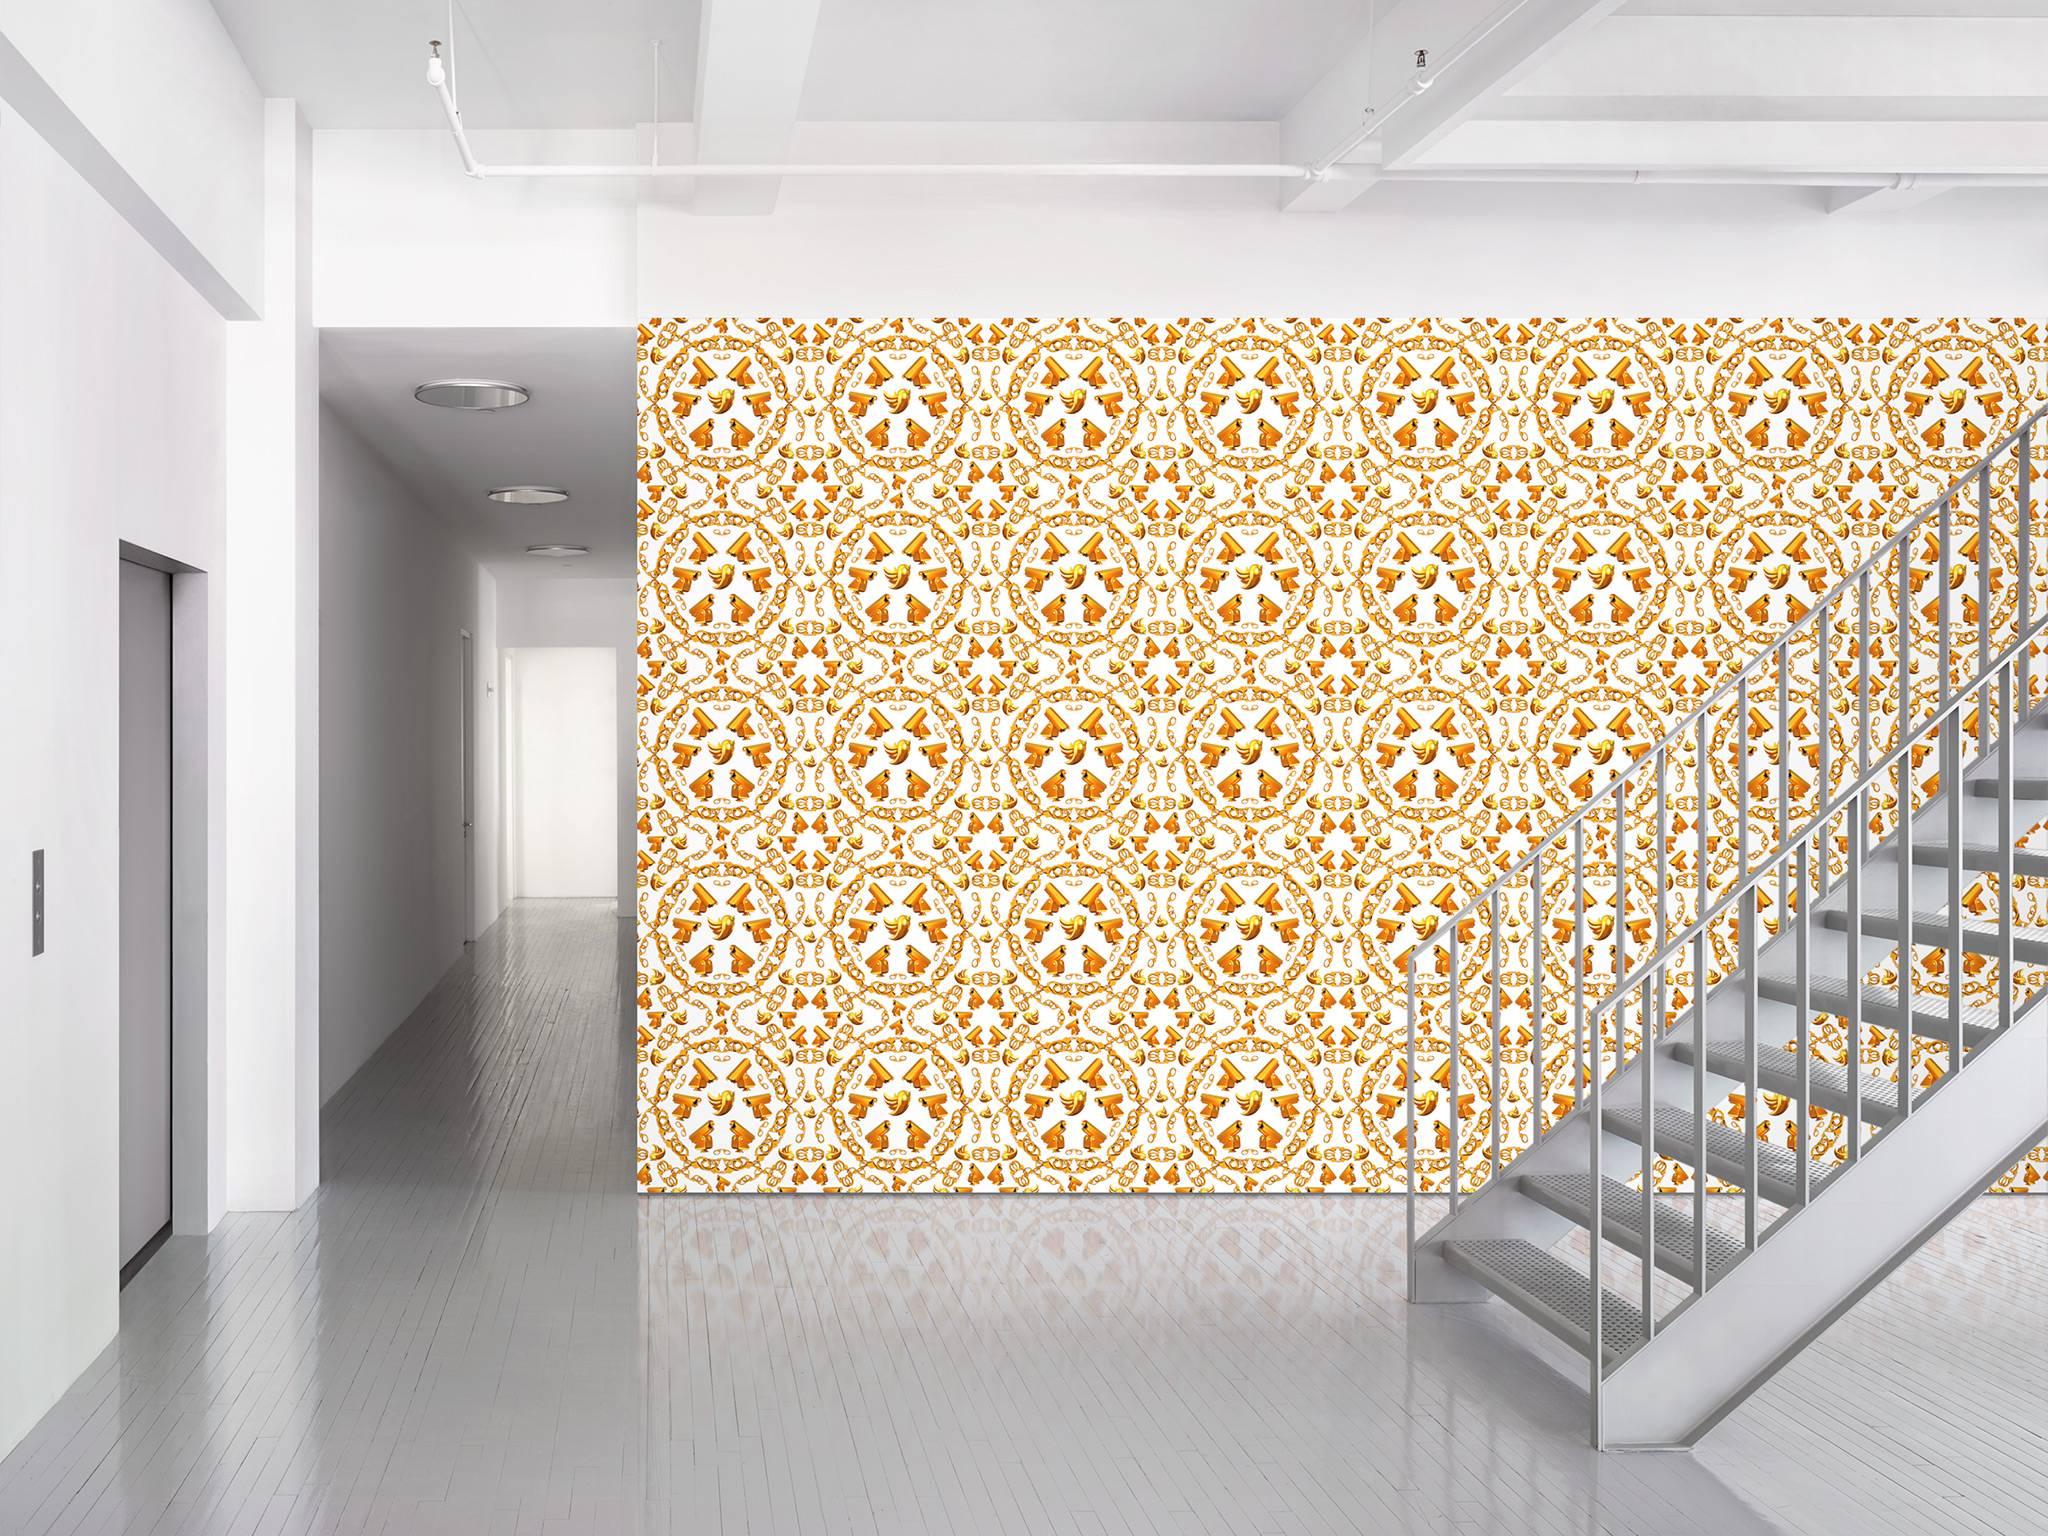 Maharam Serpentine Galleries Wallpaper
Golden Age by Ai Weiwei 
001

Ai Weiwei is a Beijing-based artist, activist, architect and curator whose iconoclastic works provoke commentary on the current political climate. Ai has become a cultural arbiter